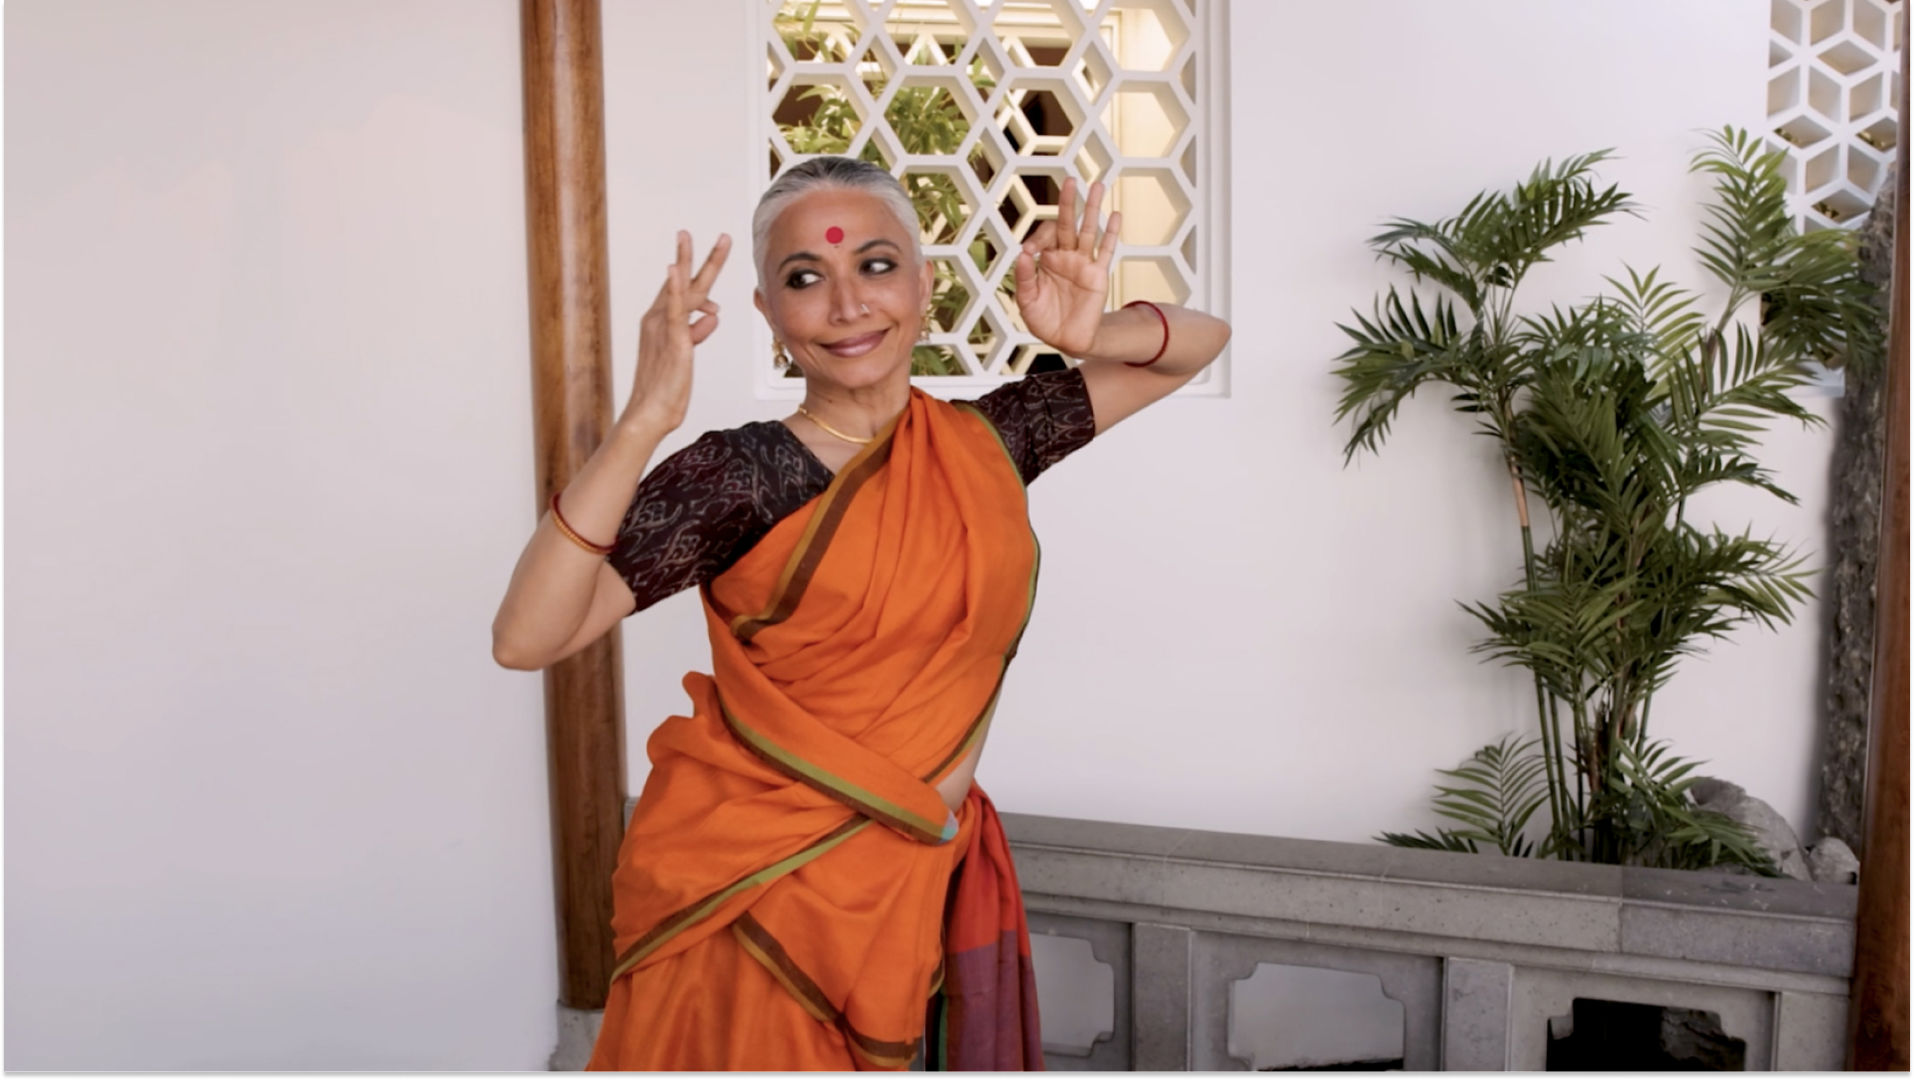 A woman stands wearing an orange sari and red bindi between her eyes. Her arms are held up near her head with her hands making a gesture. Behind her is a whitewall and green plant.